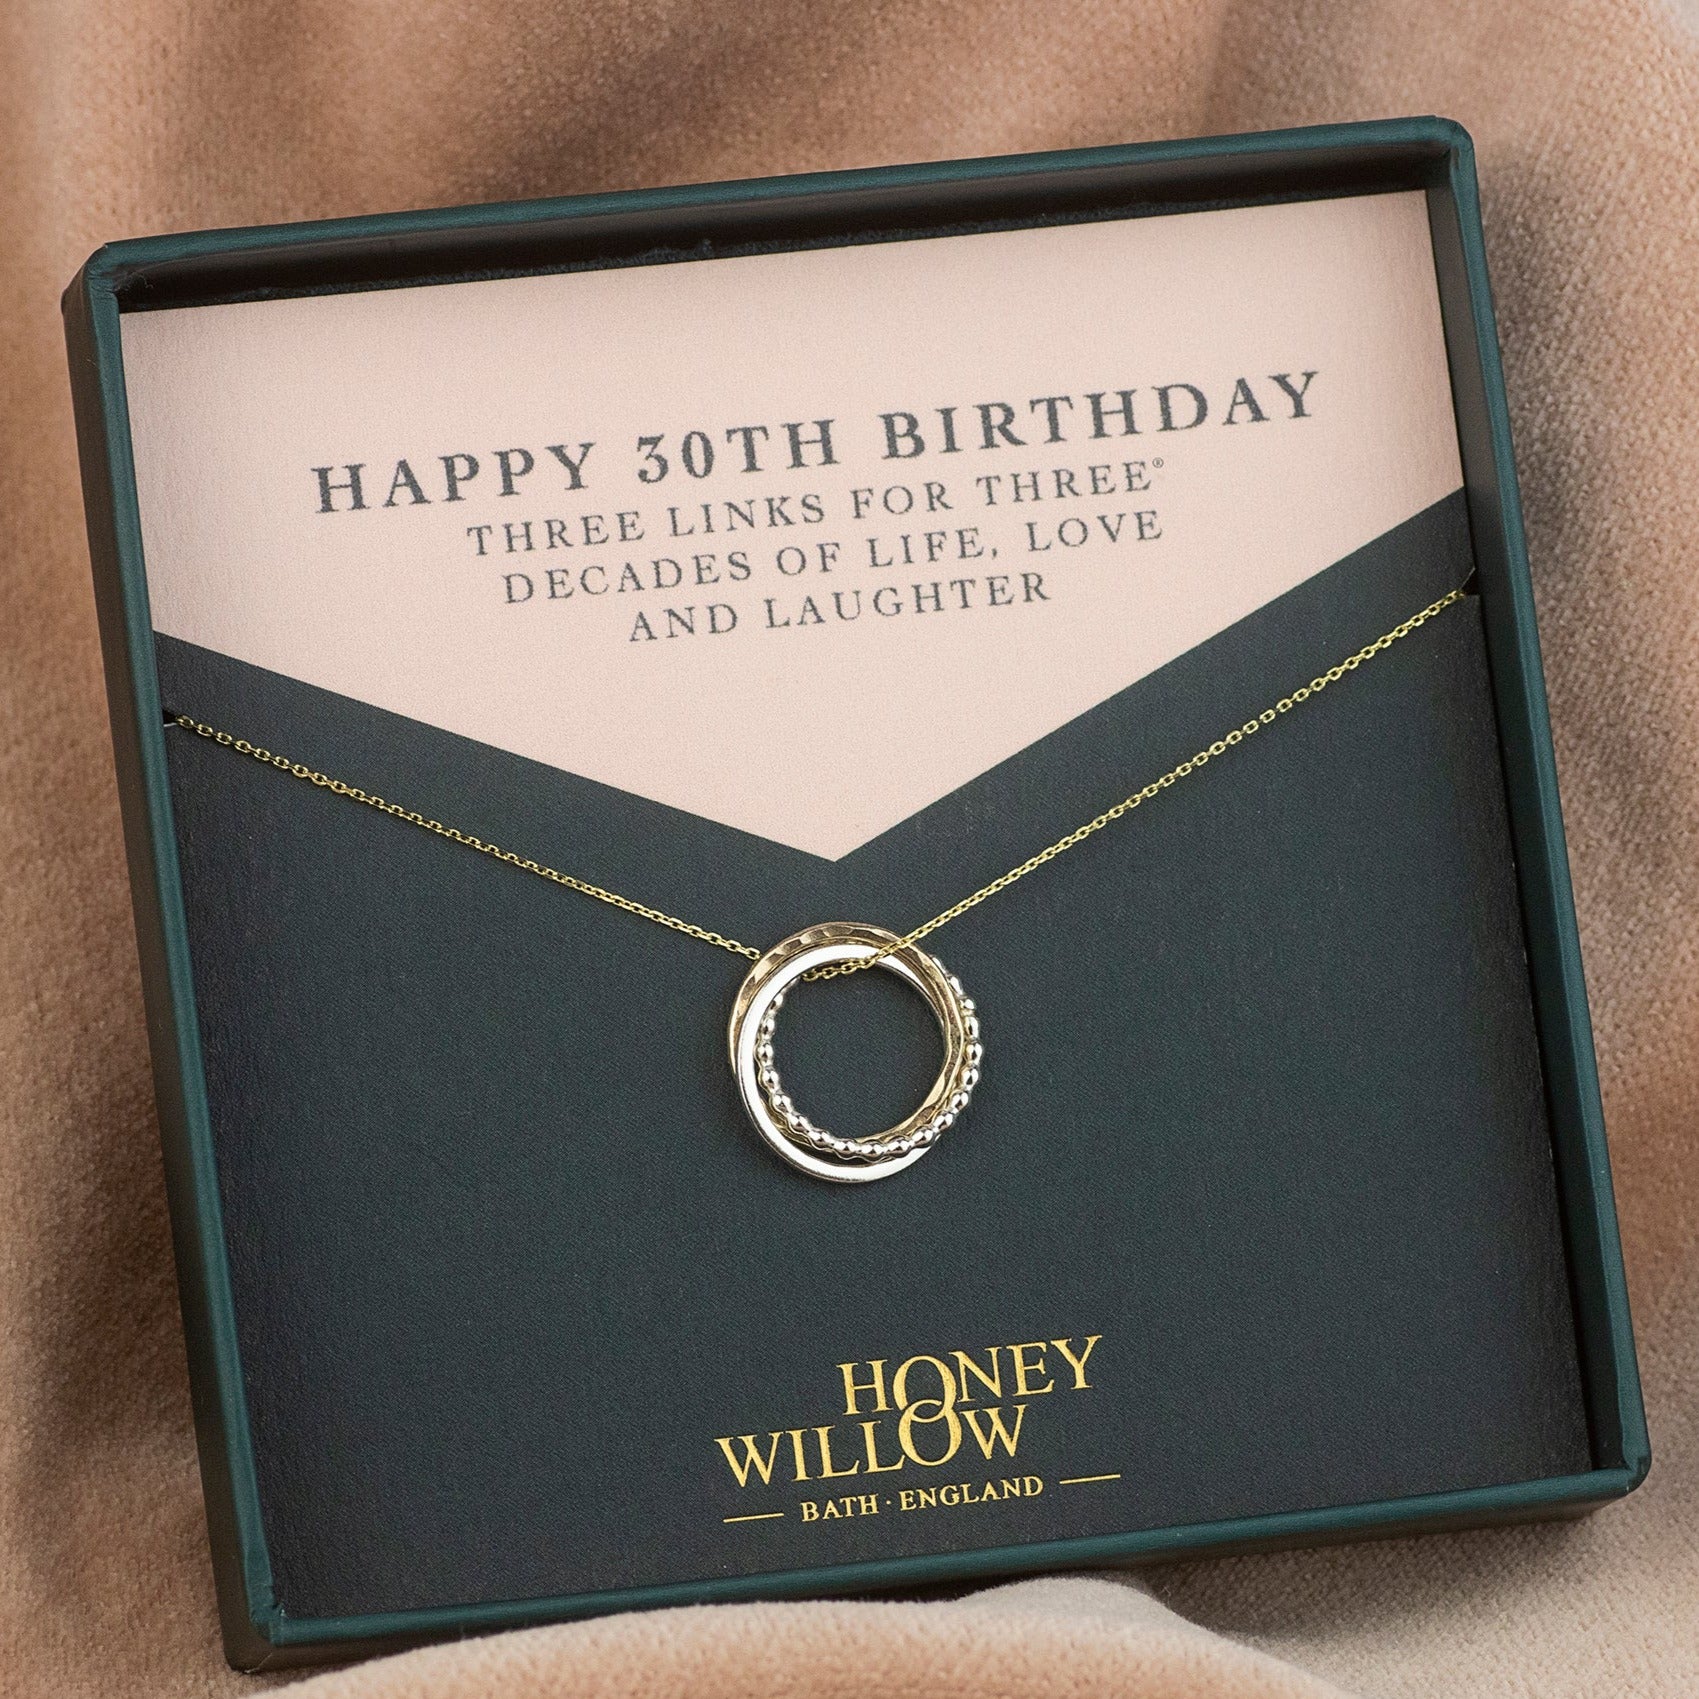 30th Birthday Necklace - Silver & 9kt Gold - The Original 3 Links for 3 Decades Necklace